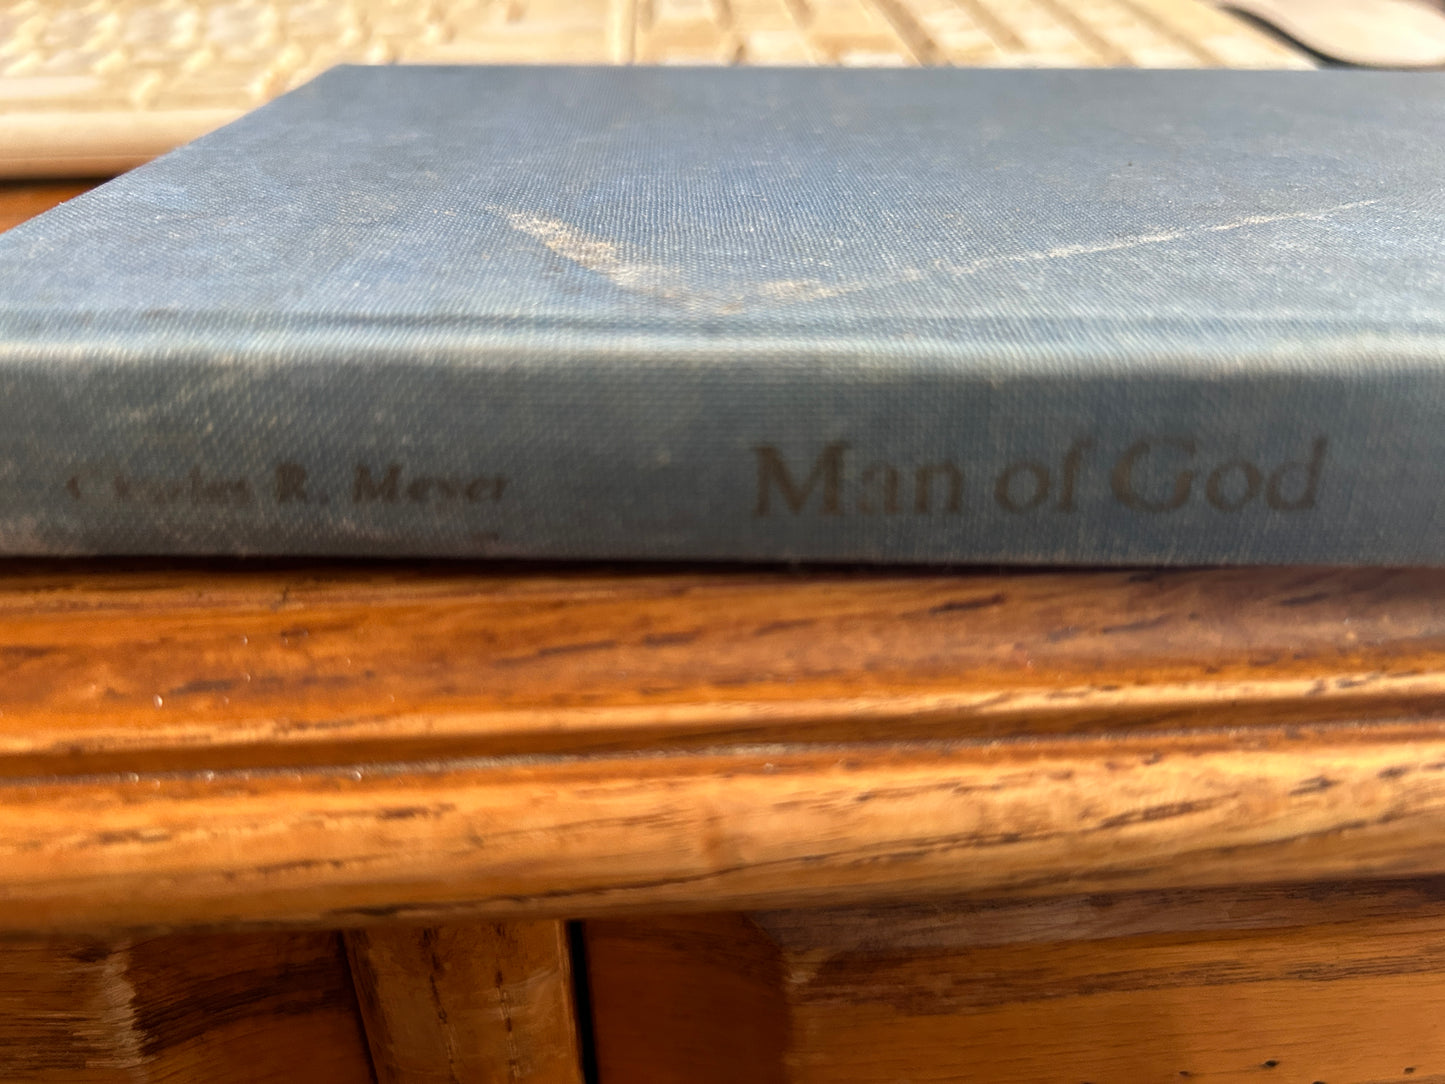 1974, Man of God A Study of the Priesthood  pub 1974 auth Charles R. Meyer